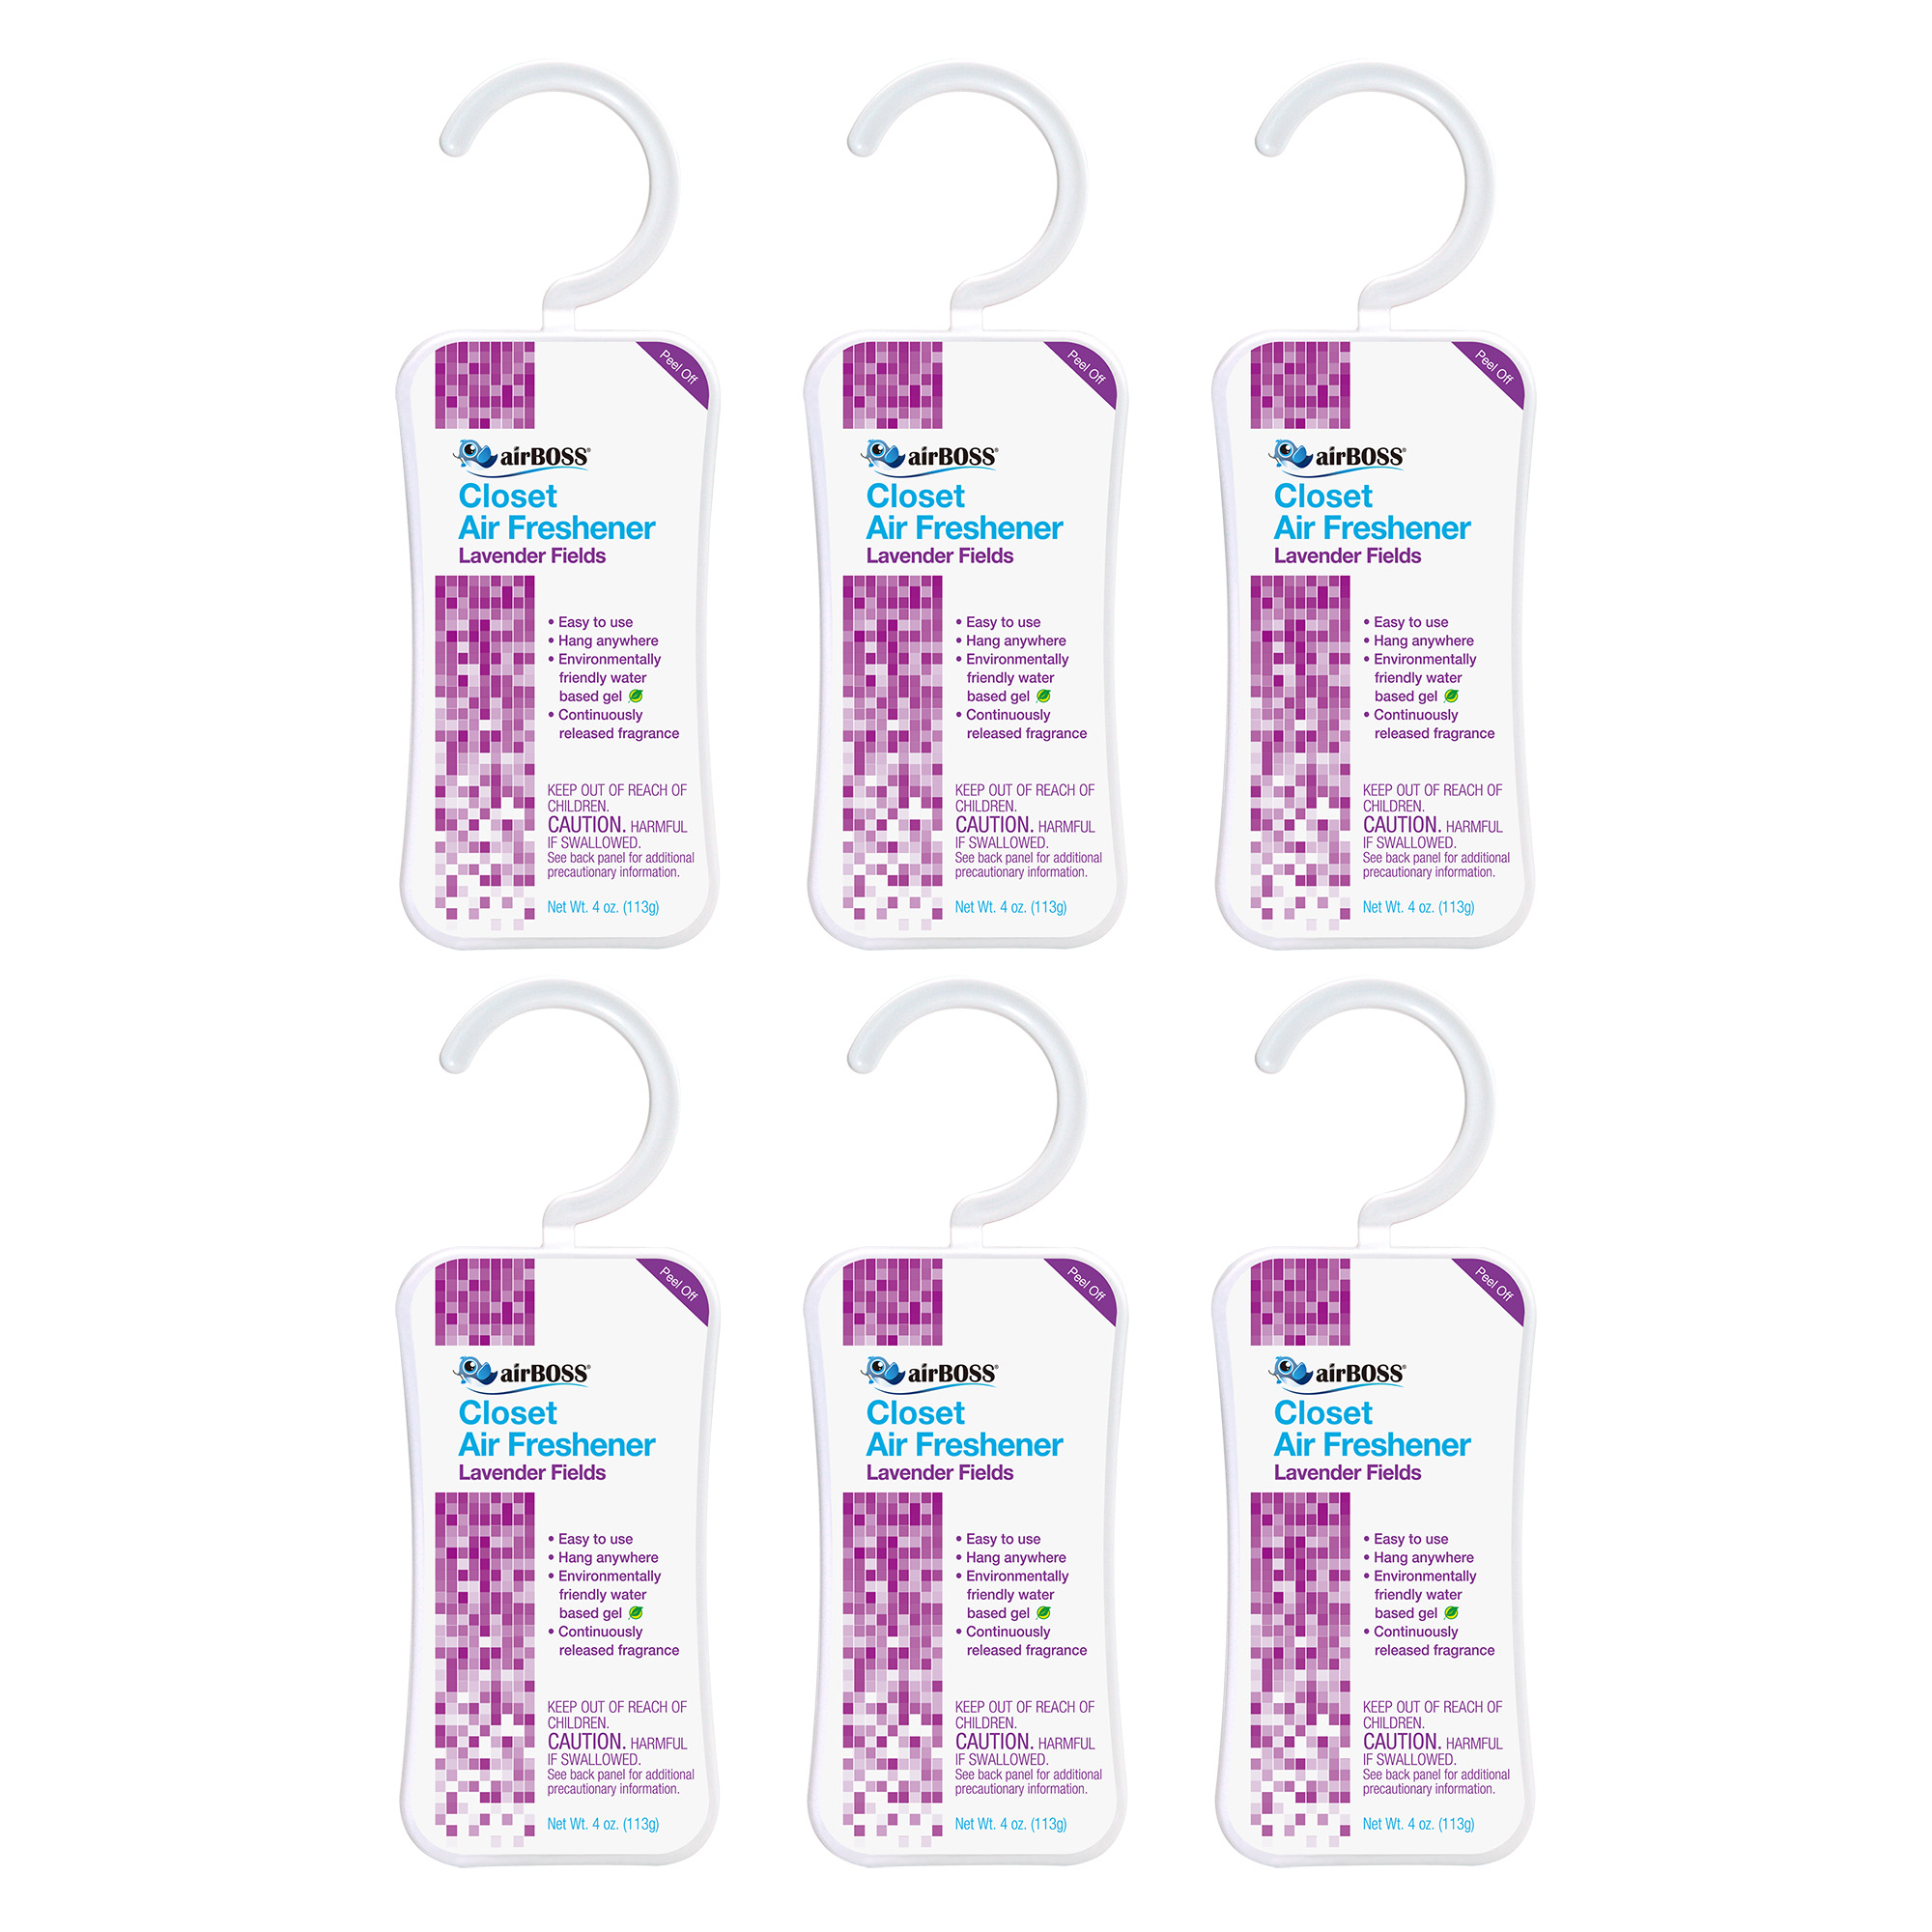 airBOSS Closet Hanging Room Air Freshener, Lavender Fragrance, 4 Ounce - image 1 of 8